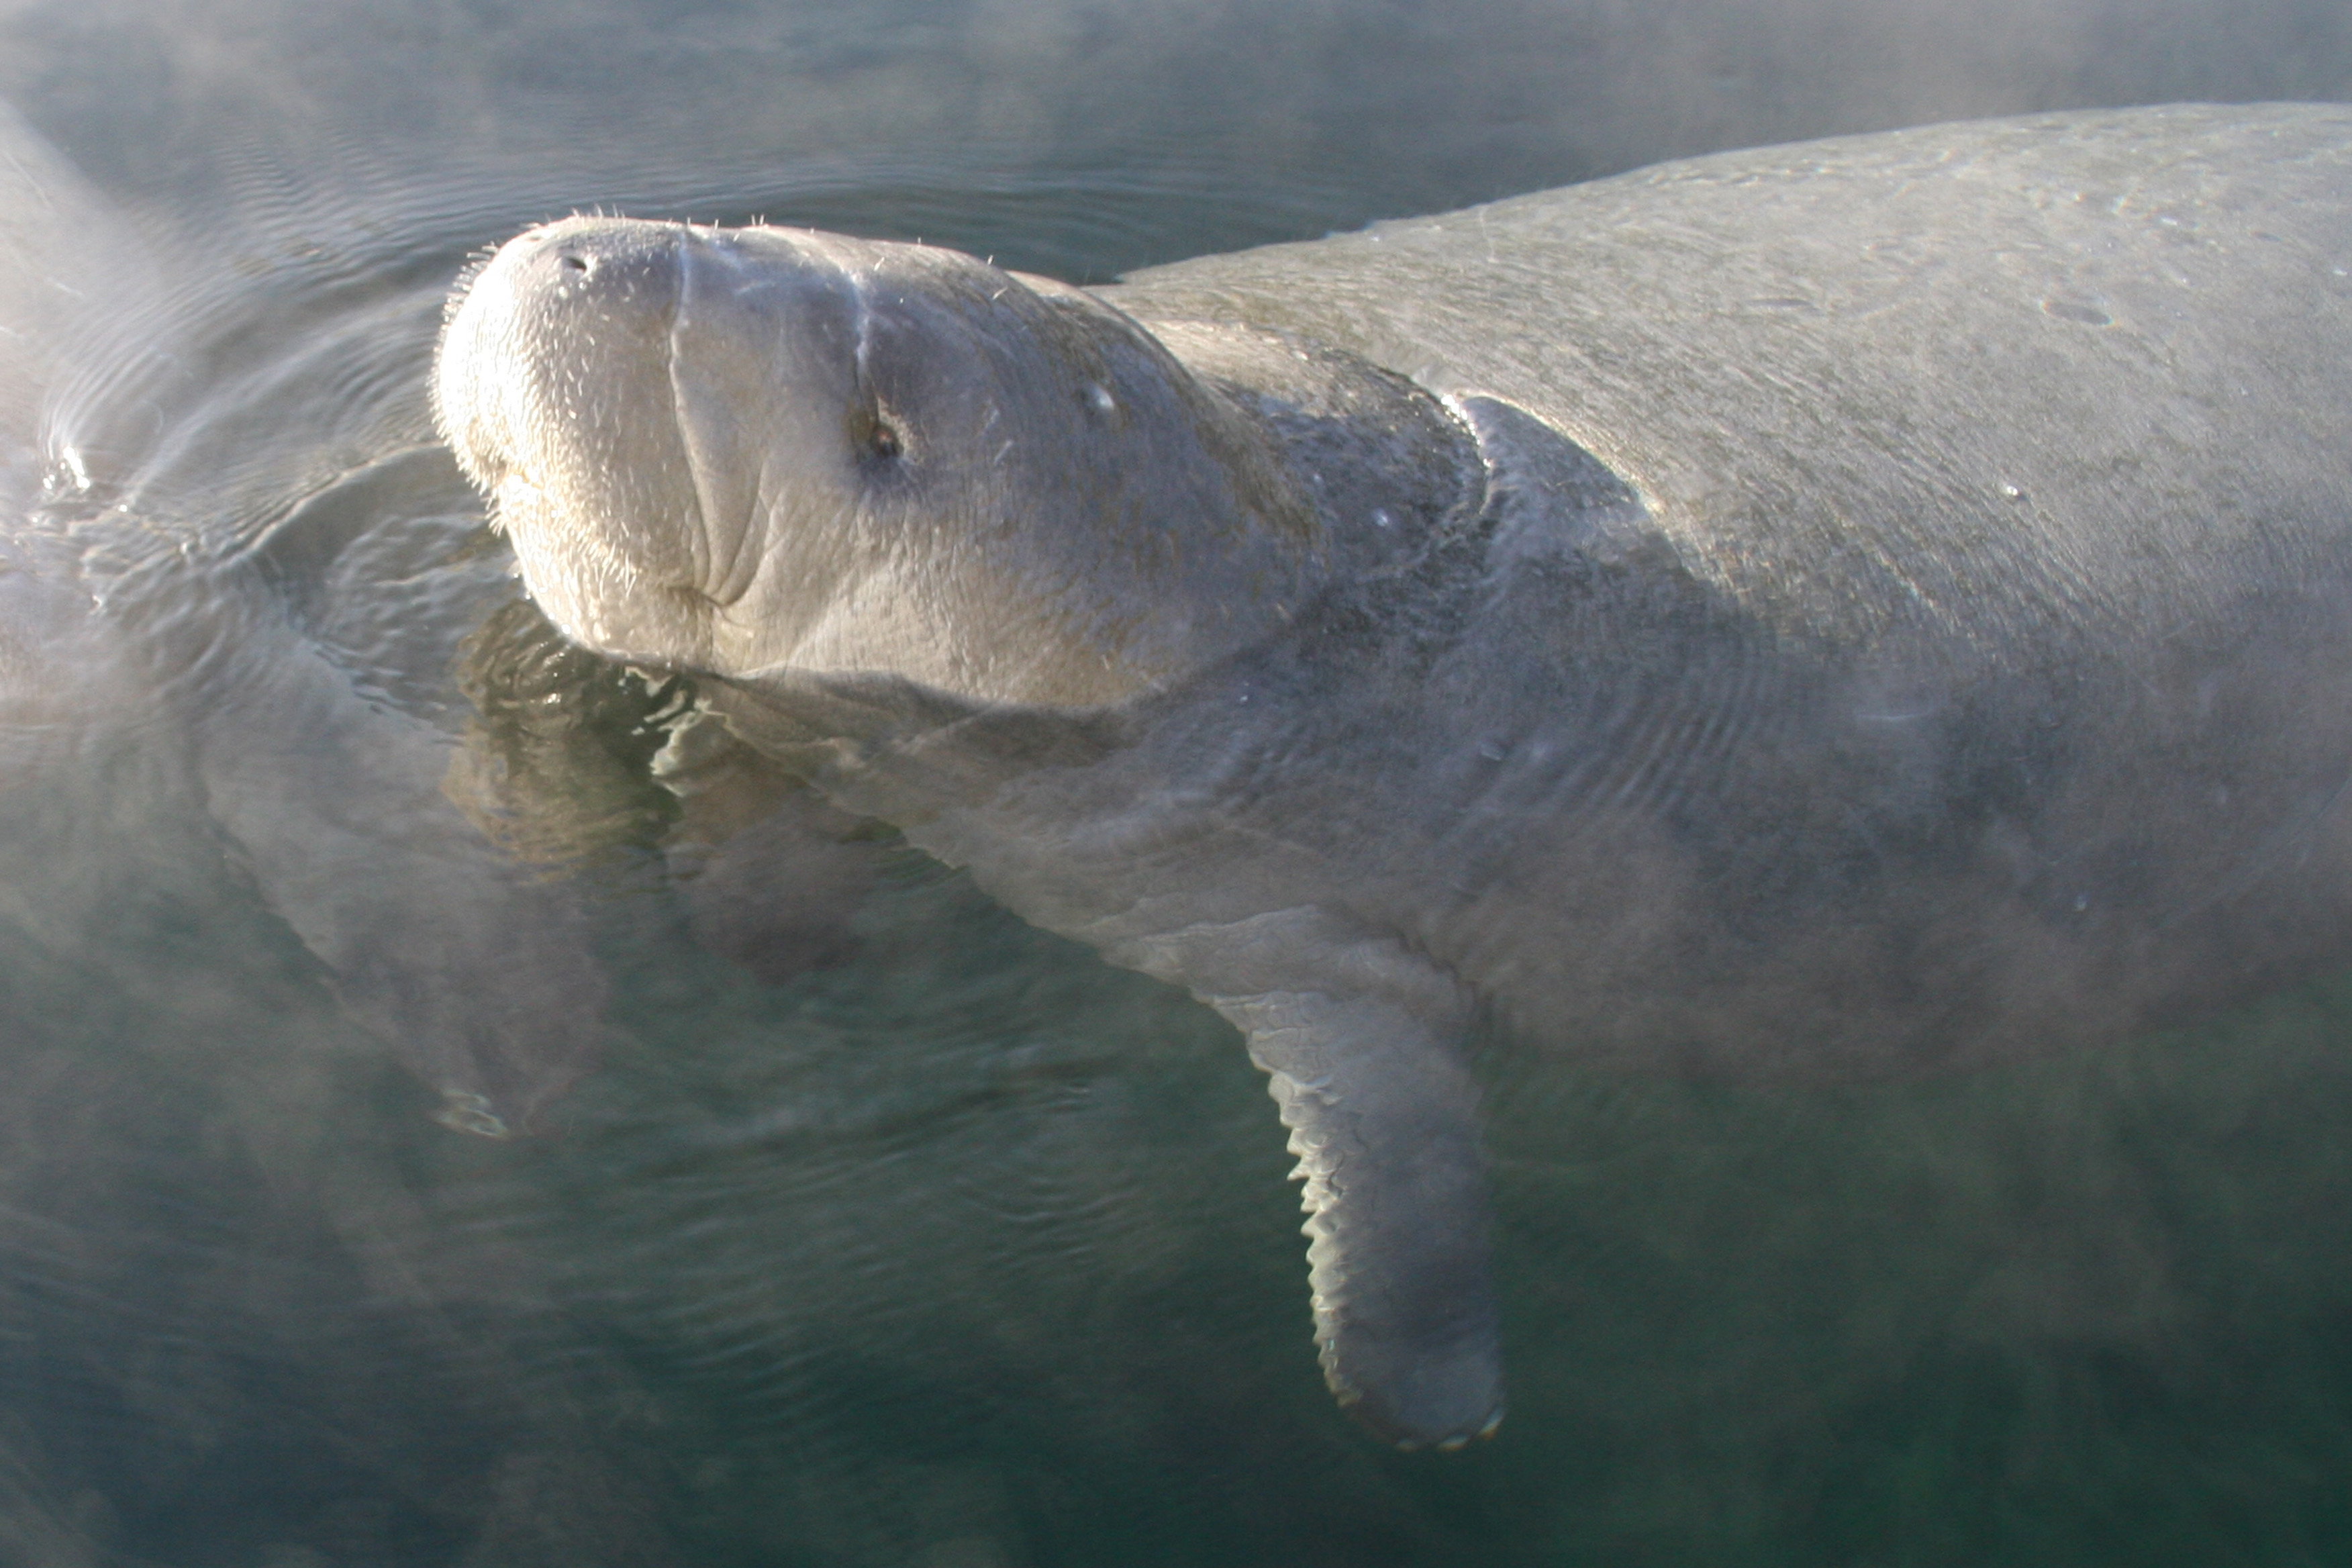 A manatee in the water with mist surrounding the water